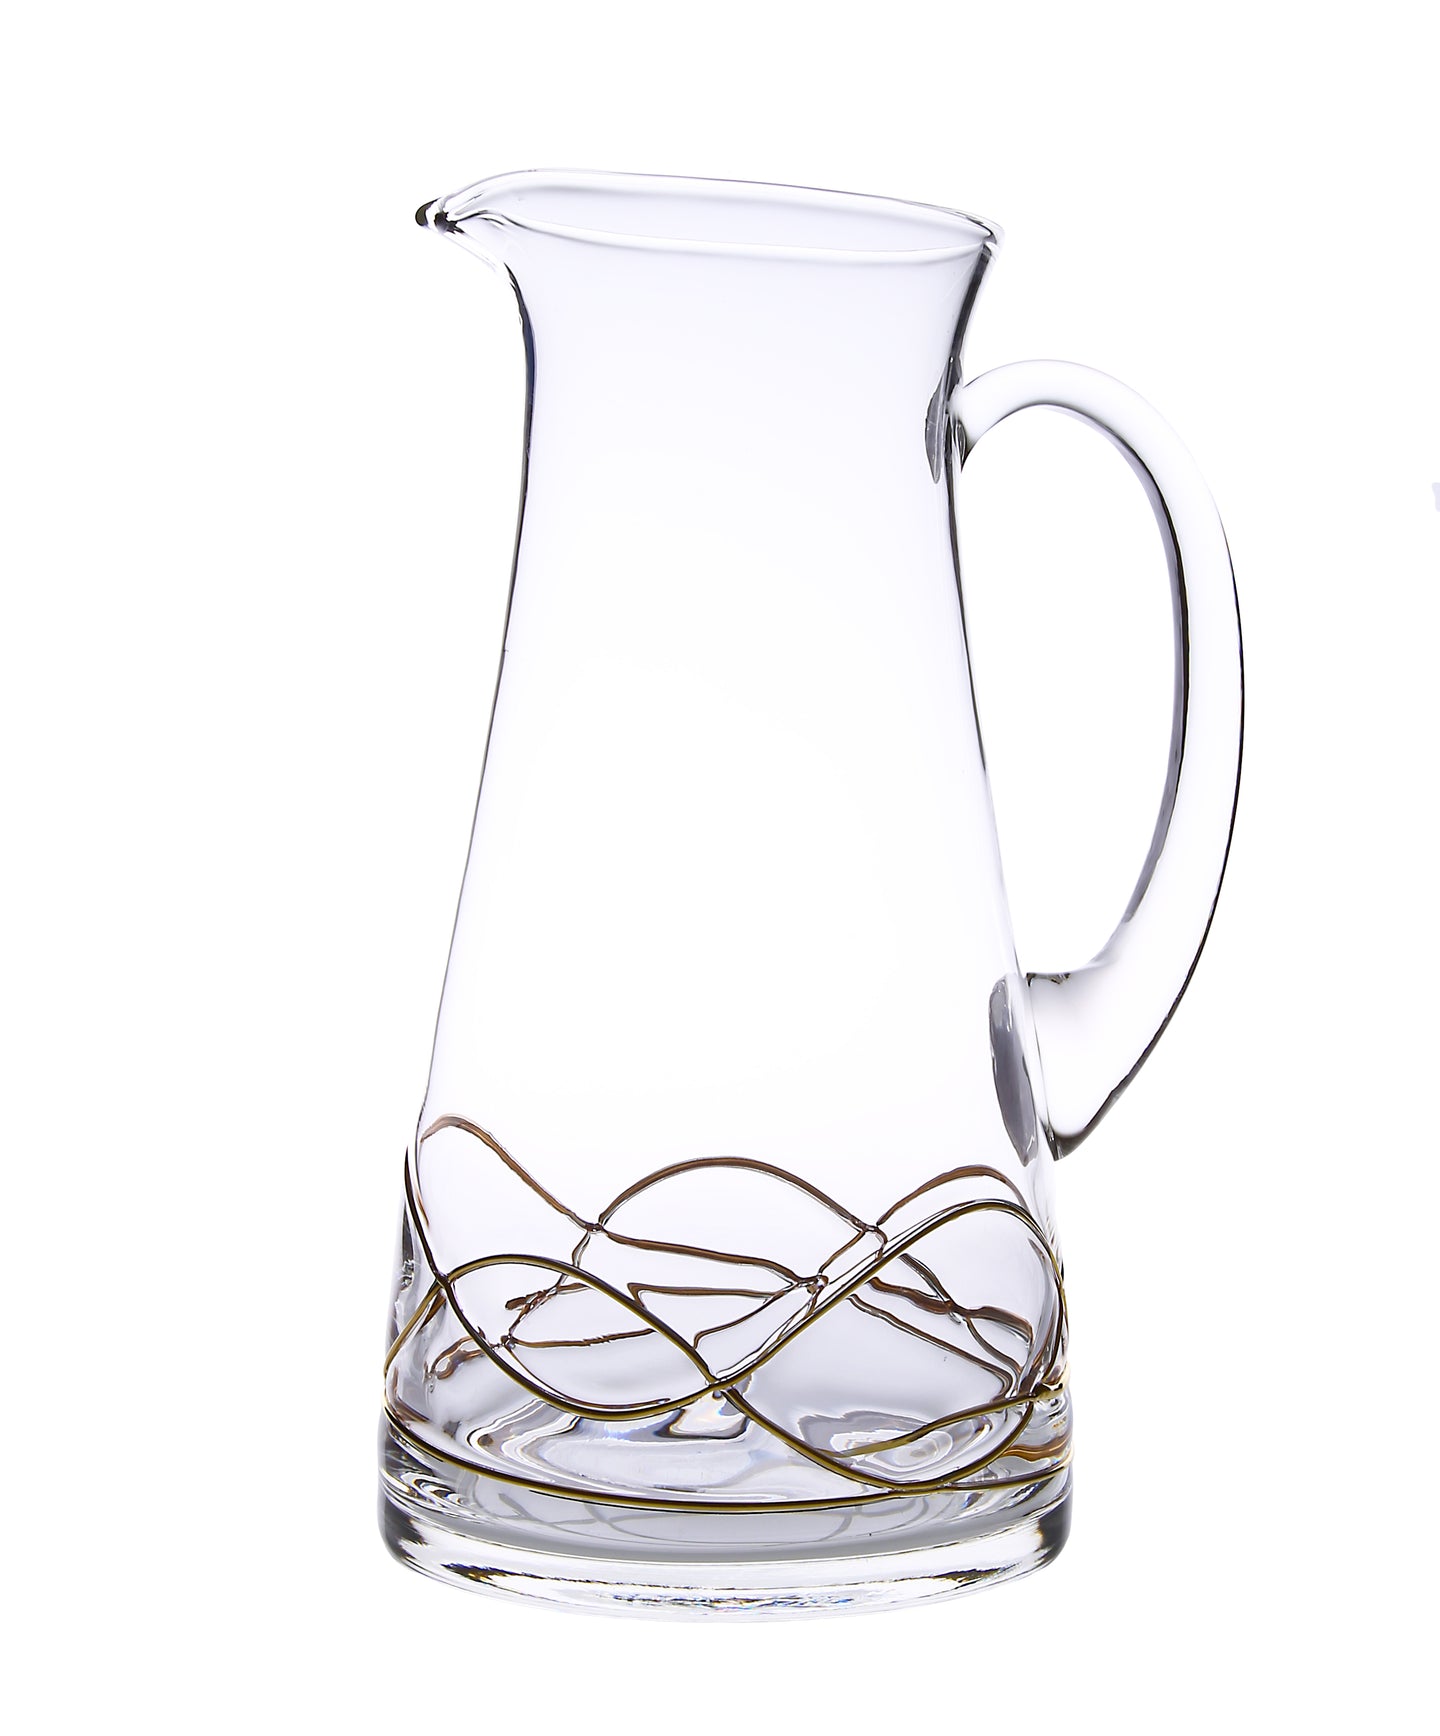 Swan Shaped Pitcher with 14K Gold Swirl Design